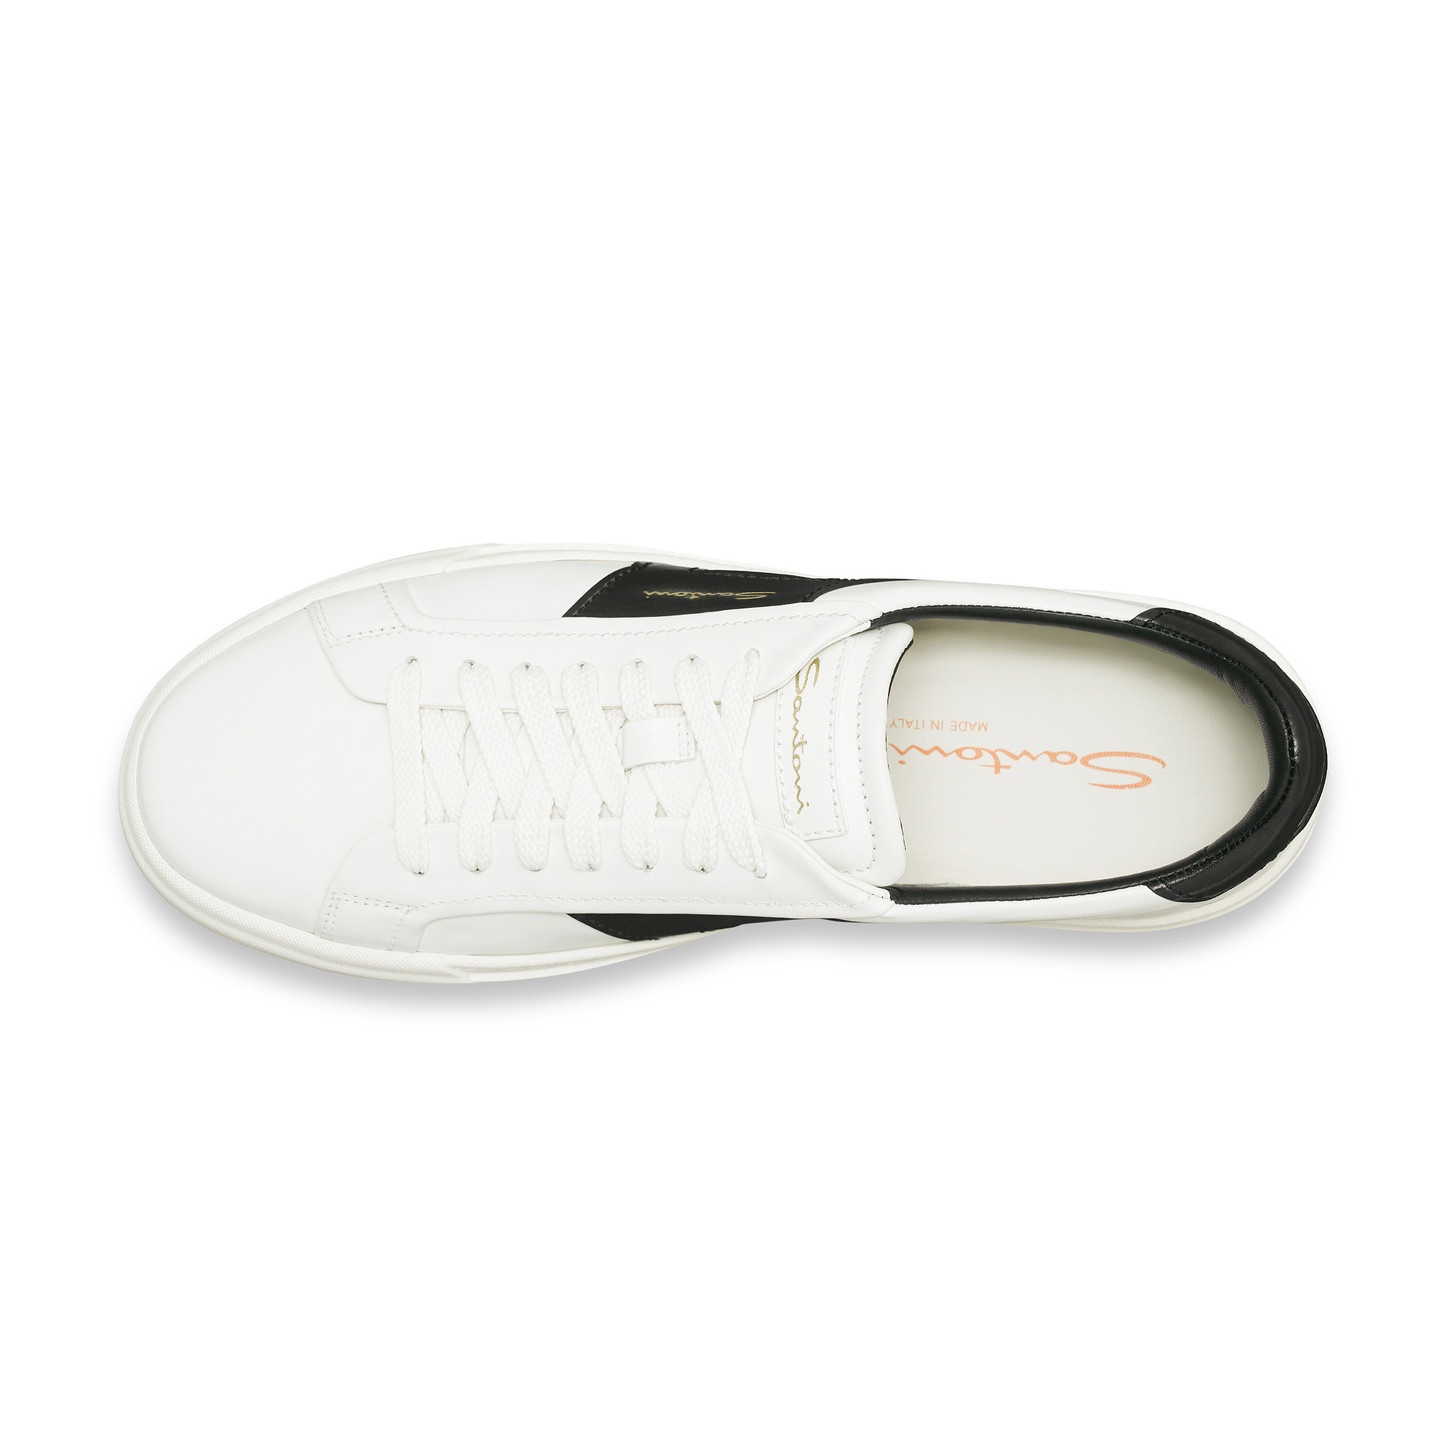 Men’s white and black leather double buckle sneaker - 5